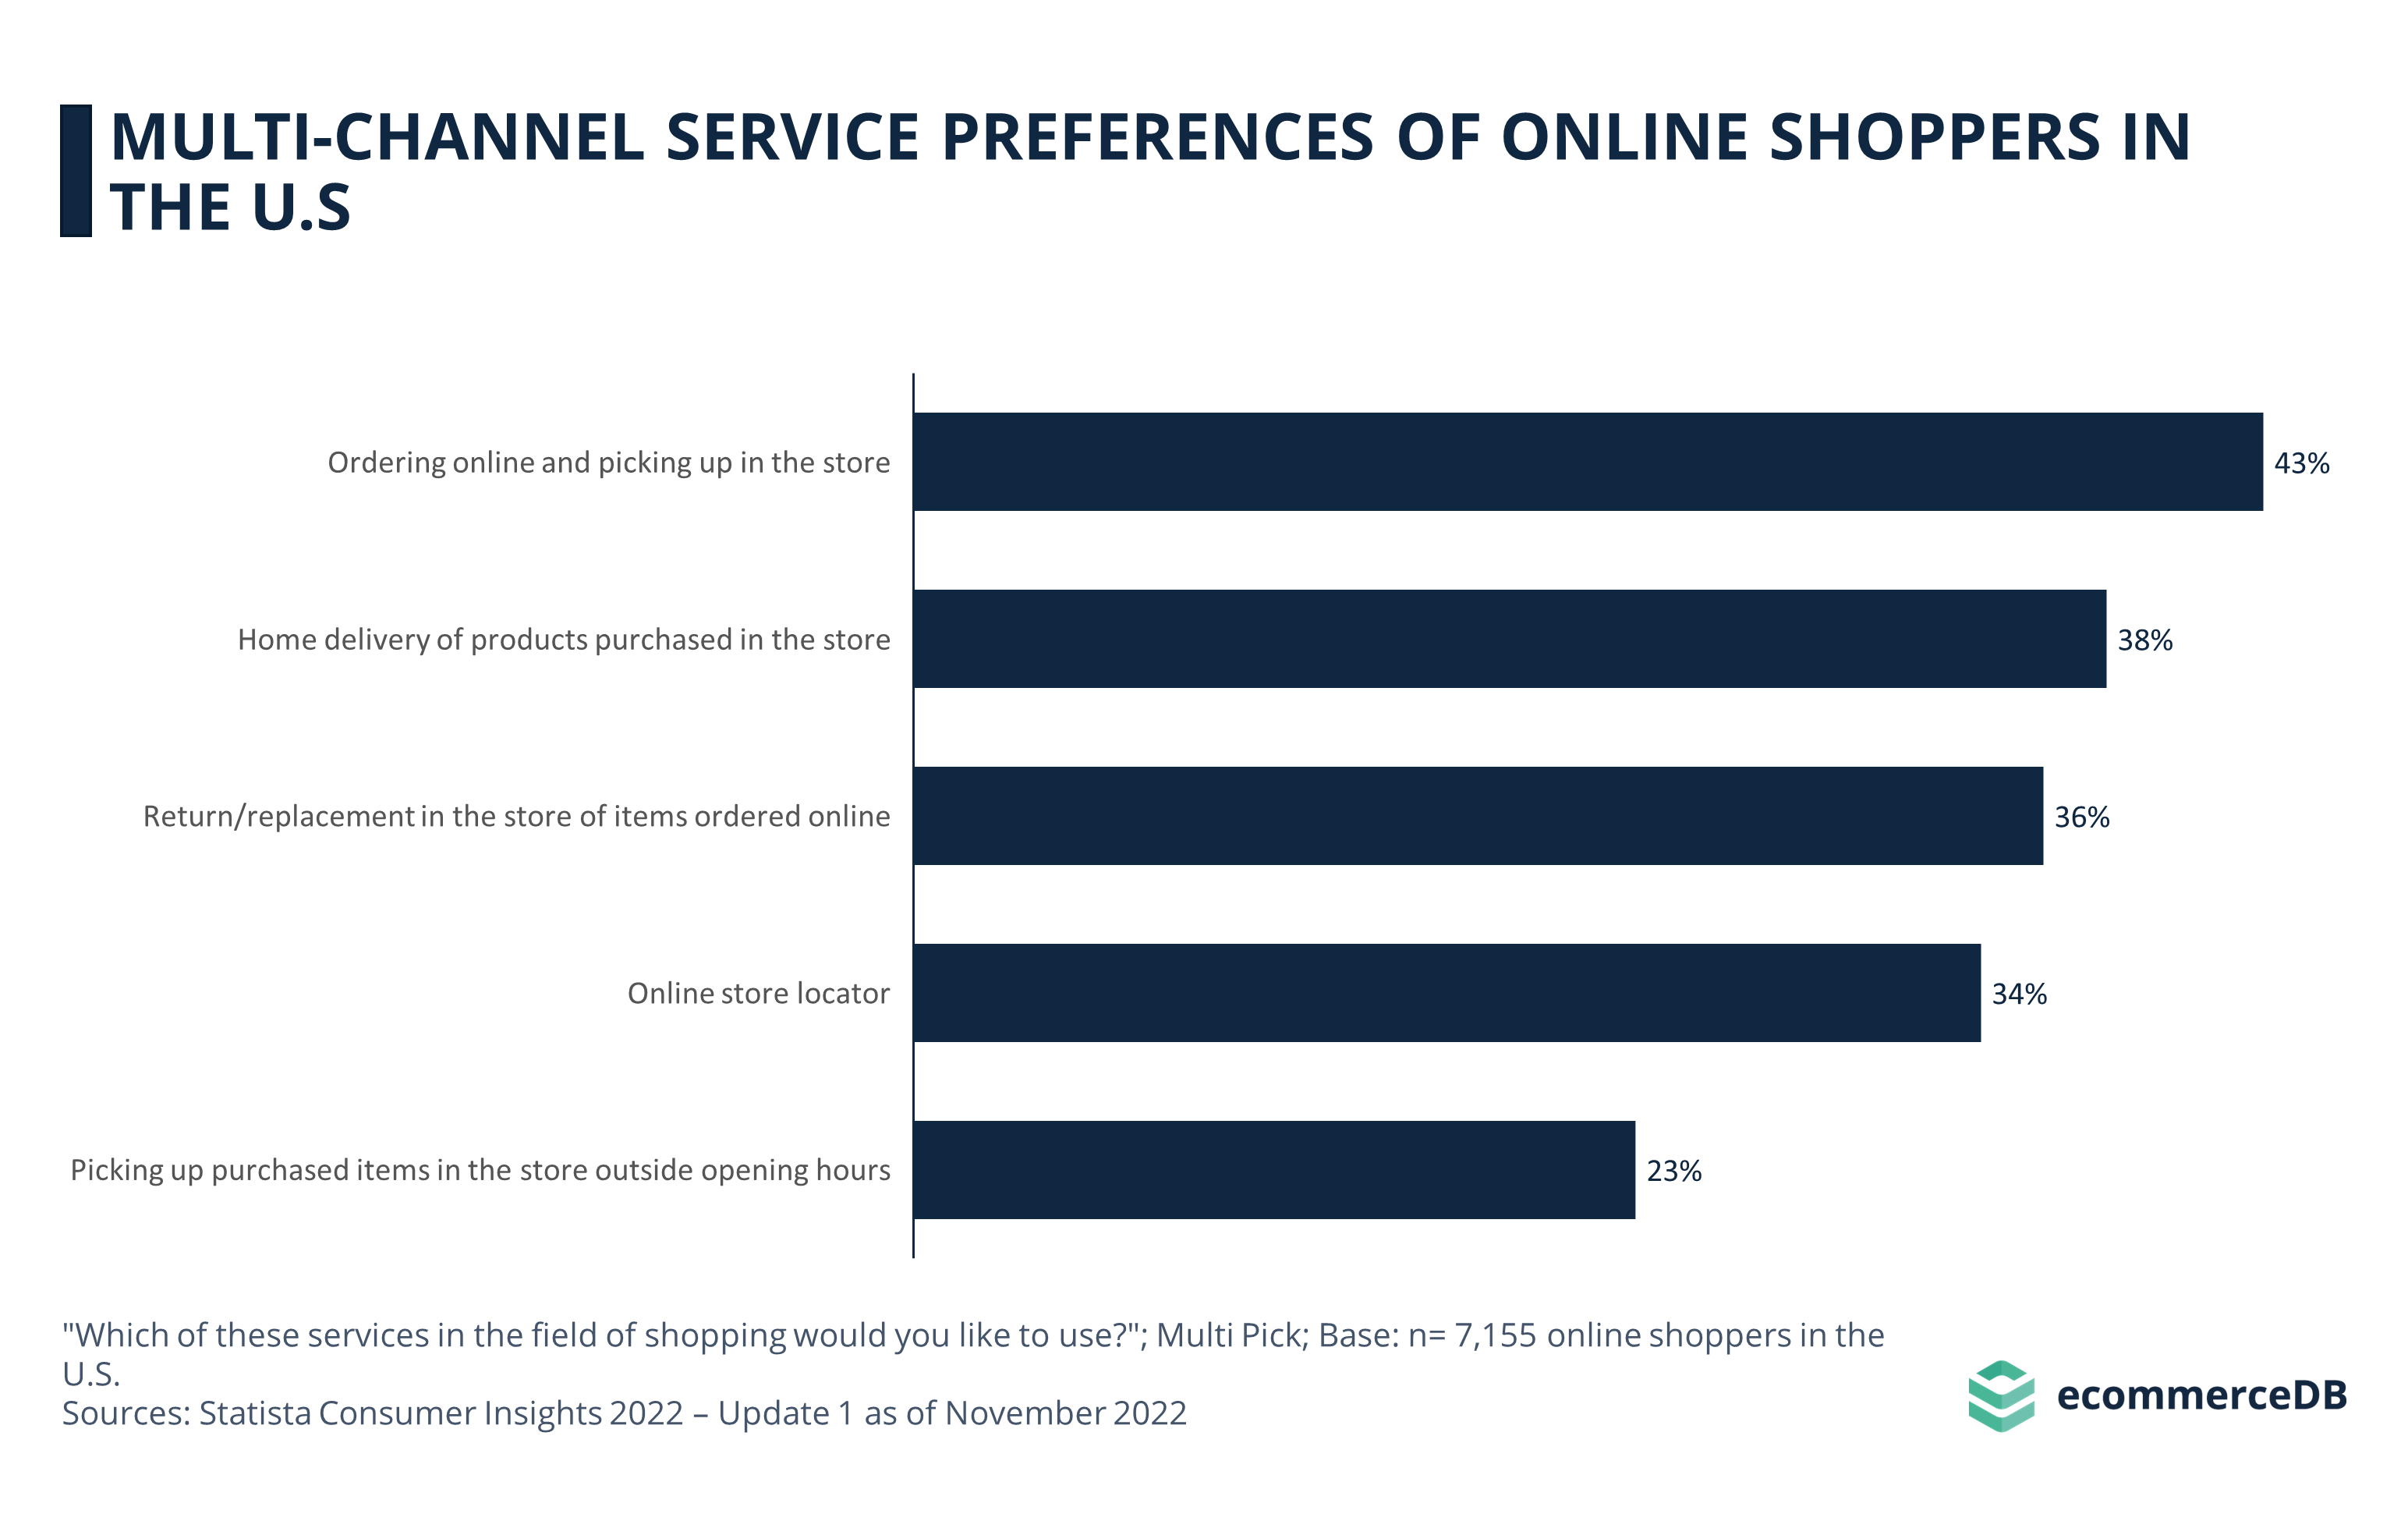 Multi-Channel Service Preferences of Online Shoppers in the U.S.